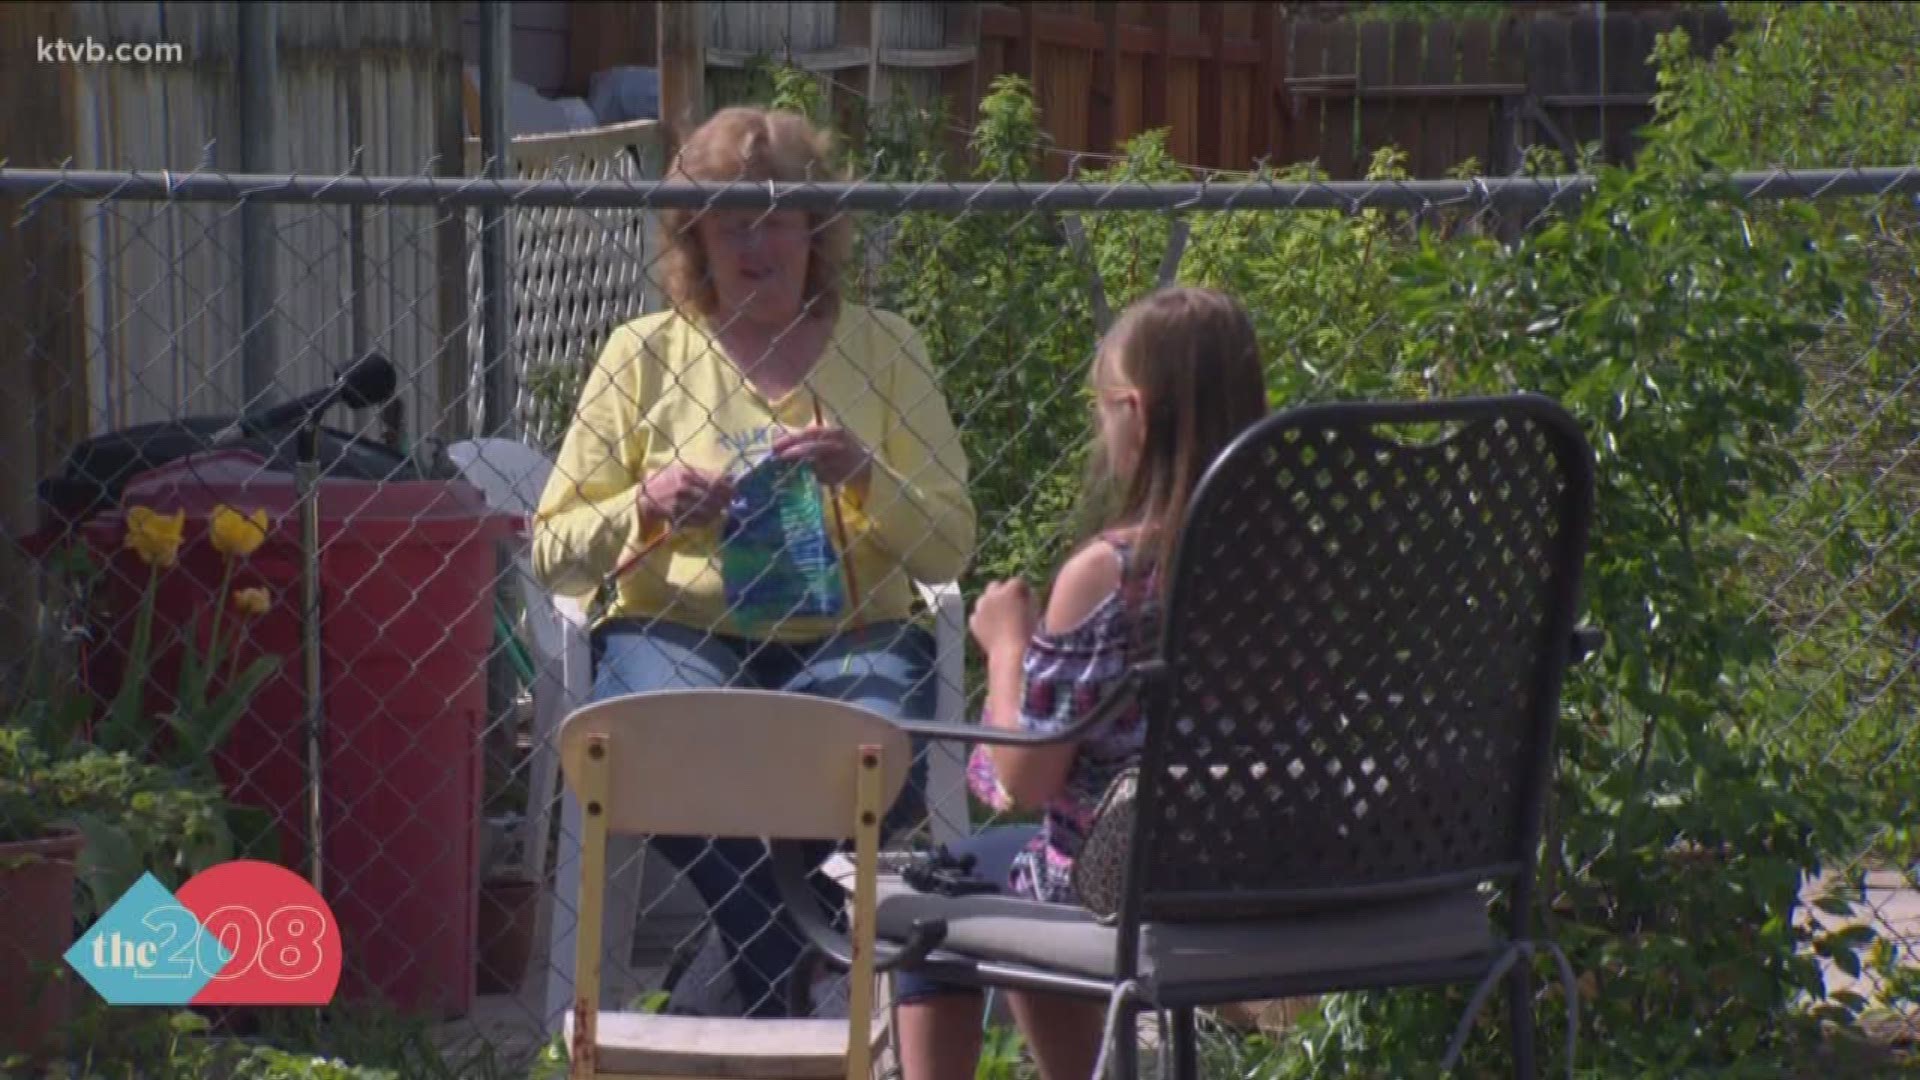 Meet 8-year-old Hattie Holladay who decided to try something new during her stay-at-home time. She's now learning to knit with some help from a neighbor.